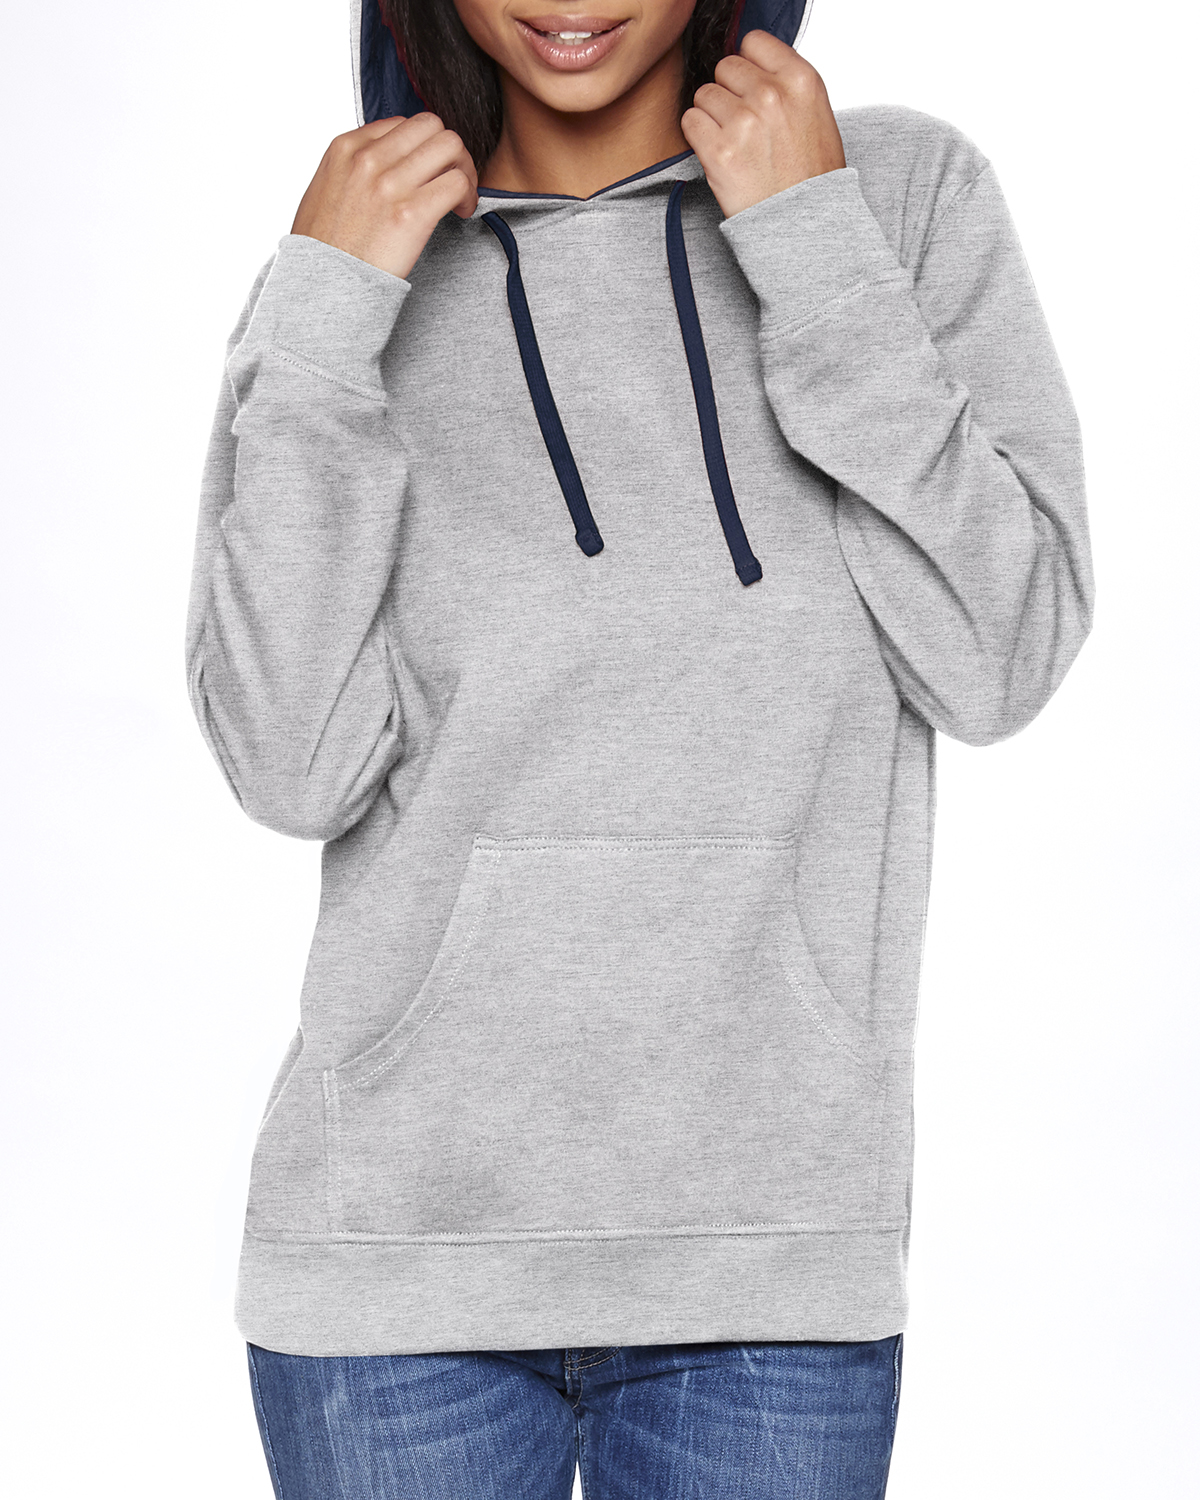 Next Level Apparel 9301 - Unisex French Terry Pullover Hoodie $16.57 ...